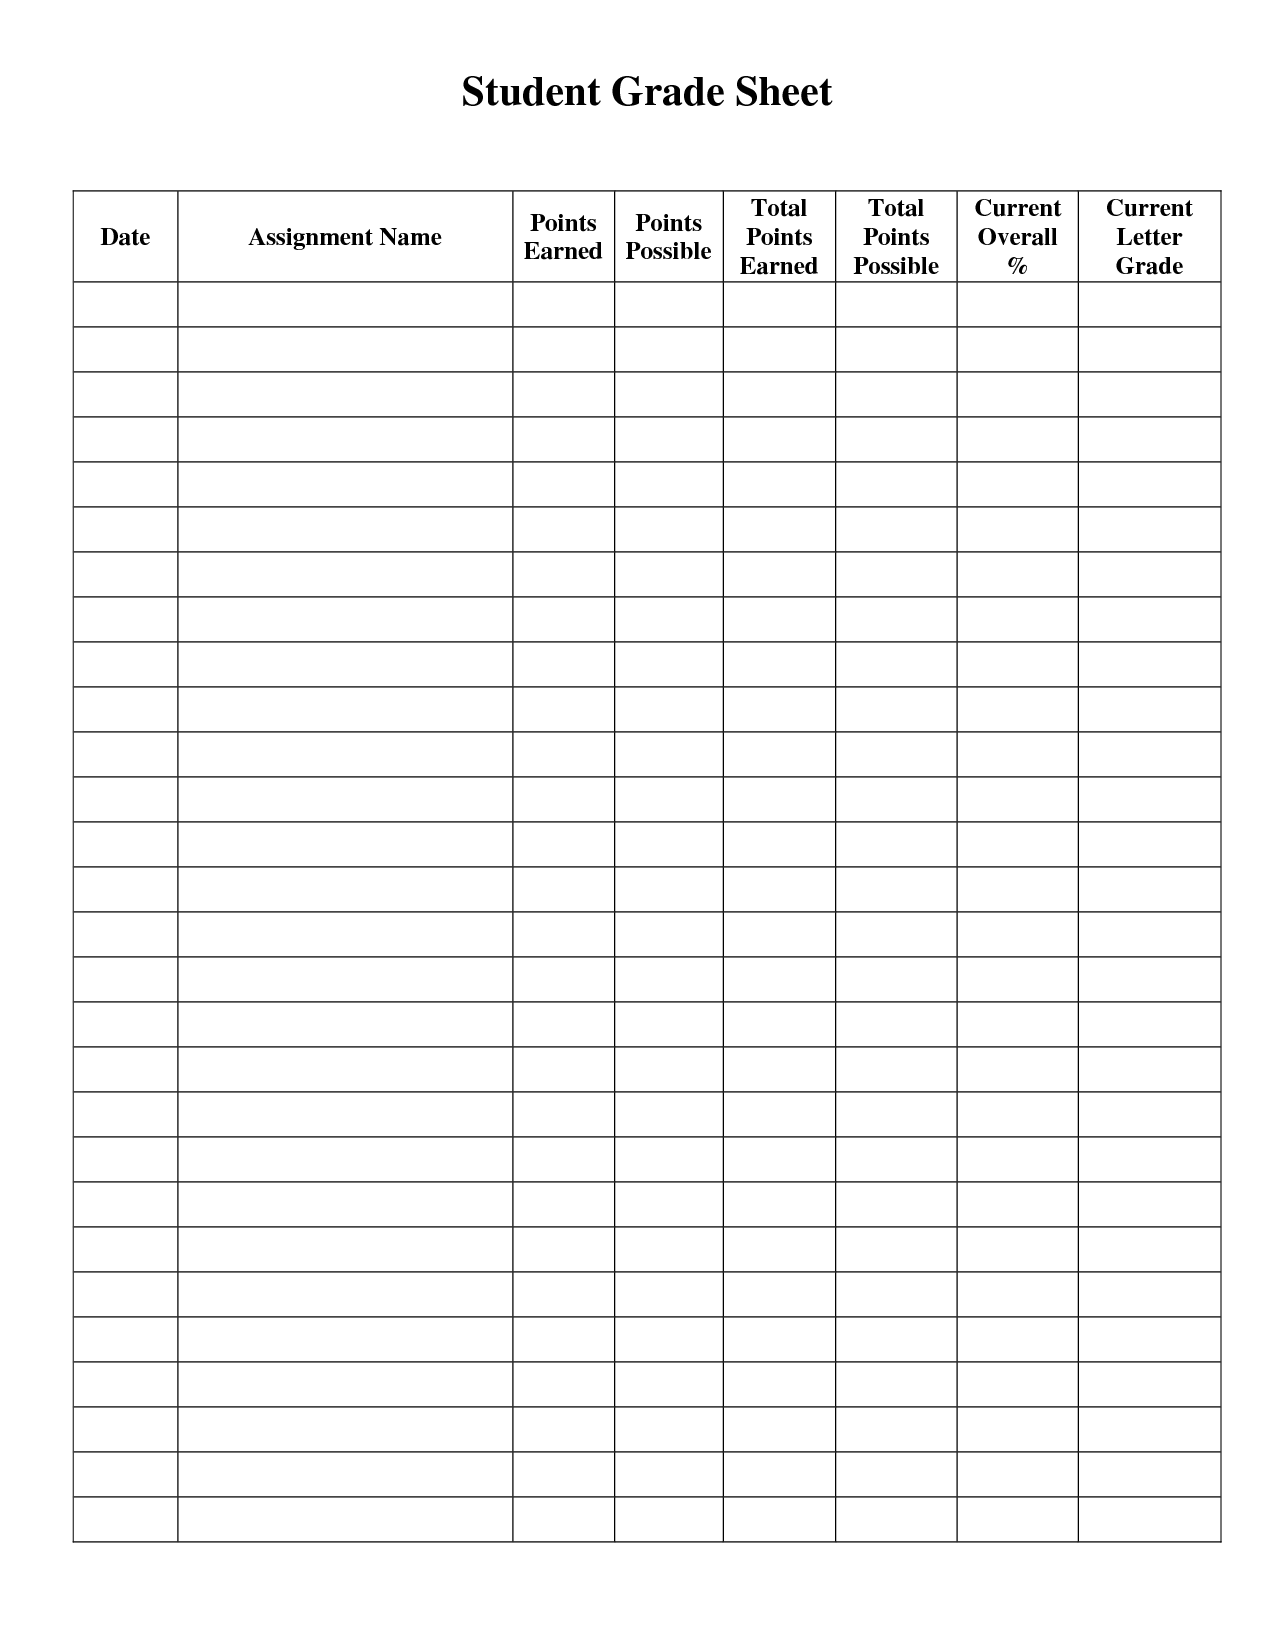 7-best-images-of-printable-grade-sheet-for-students-student-grade-sheet-printable-student